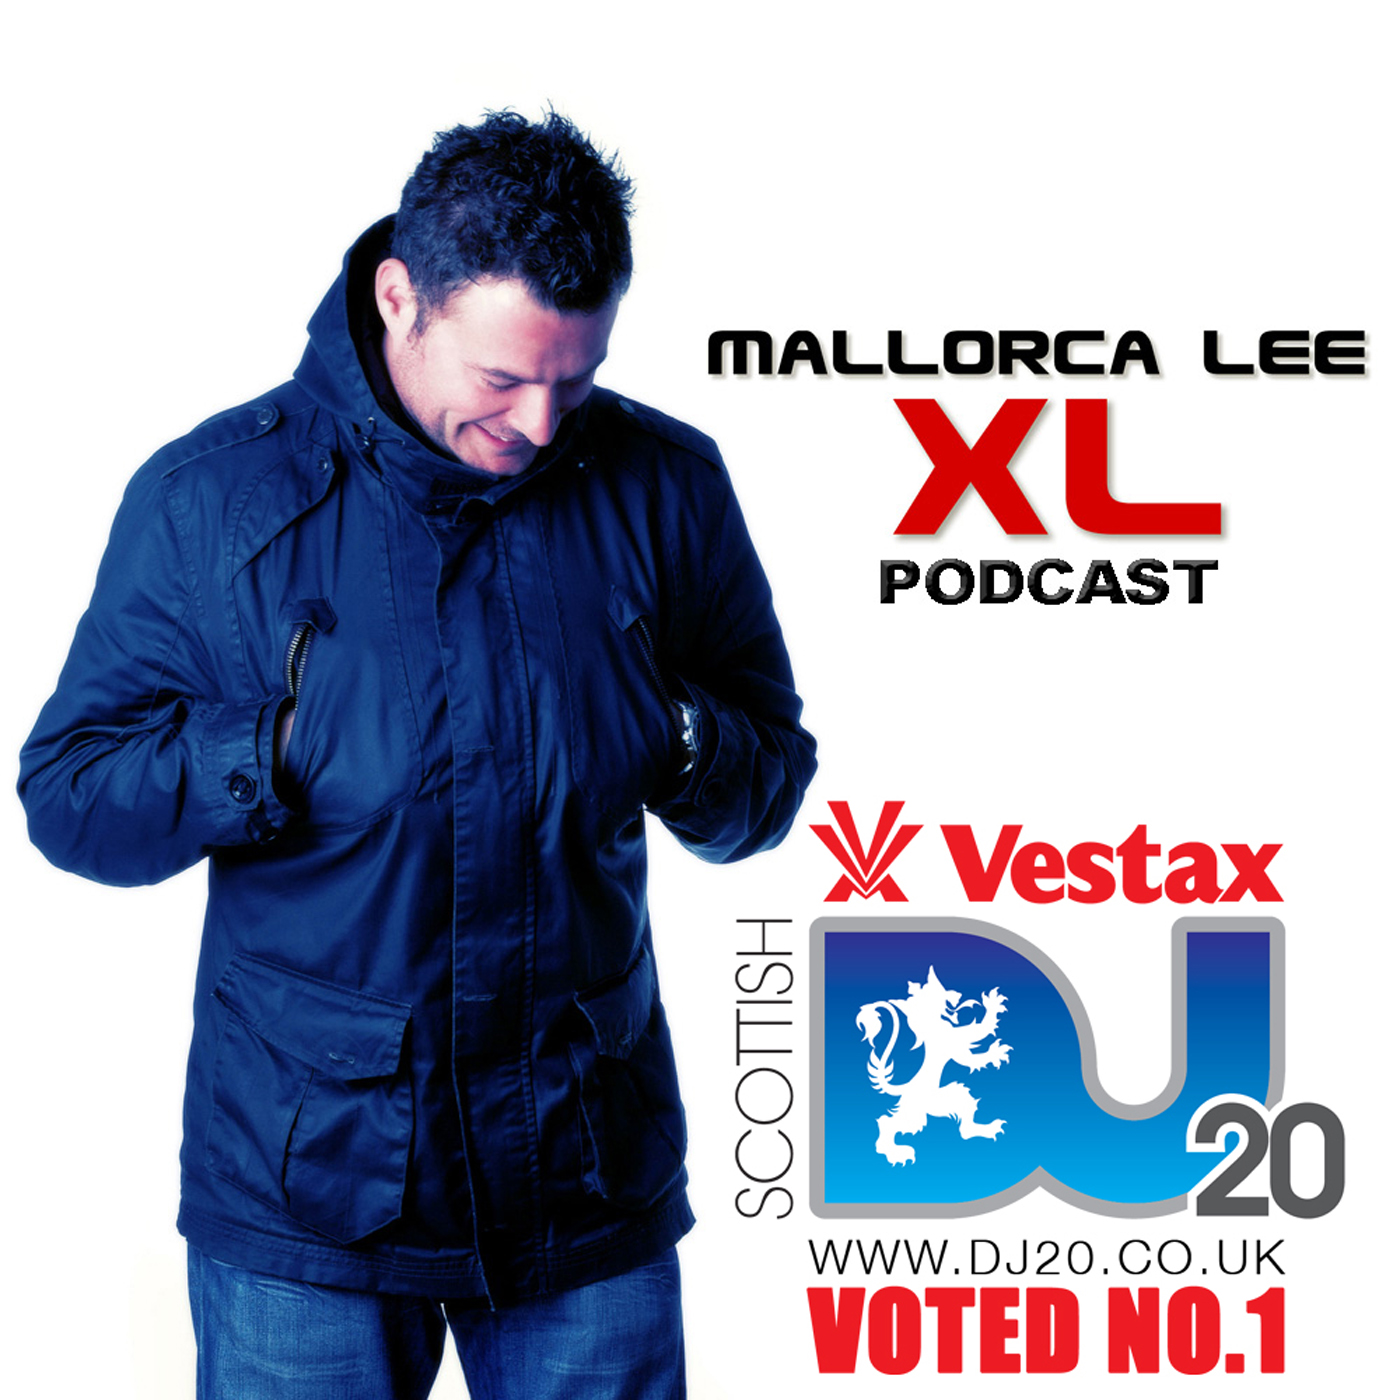 Mallorca Lee's XL Podcast ep. 47 - it's ALL about TRANCE